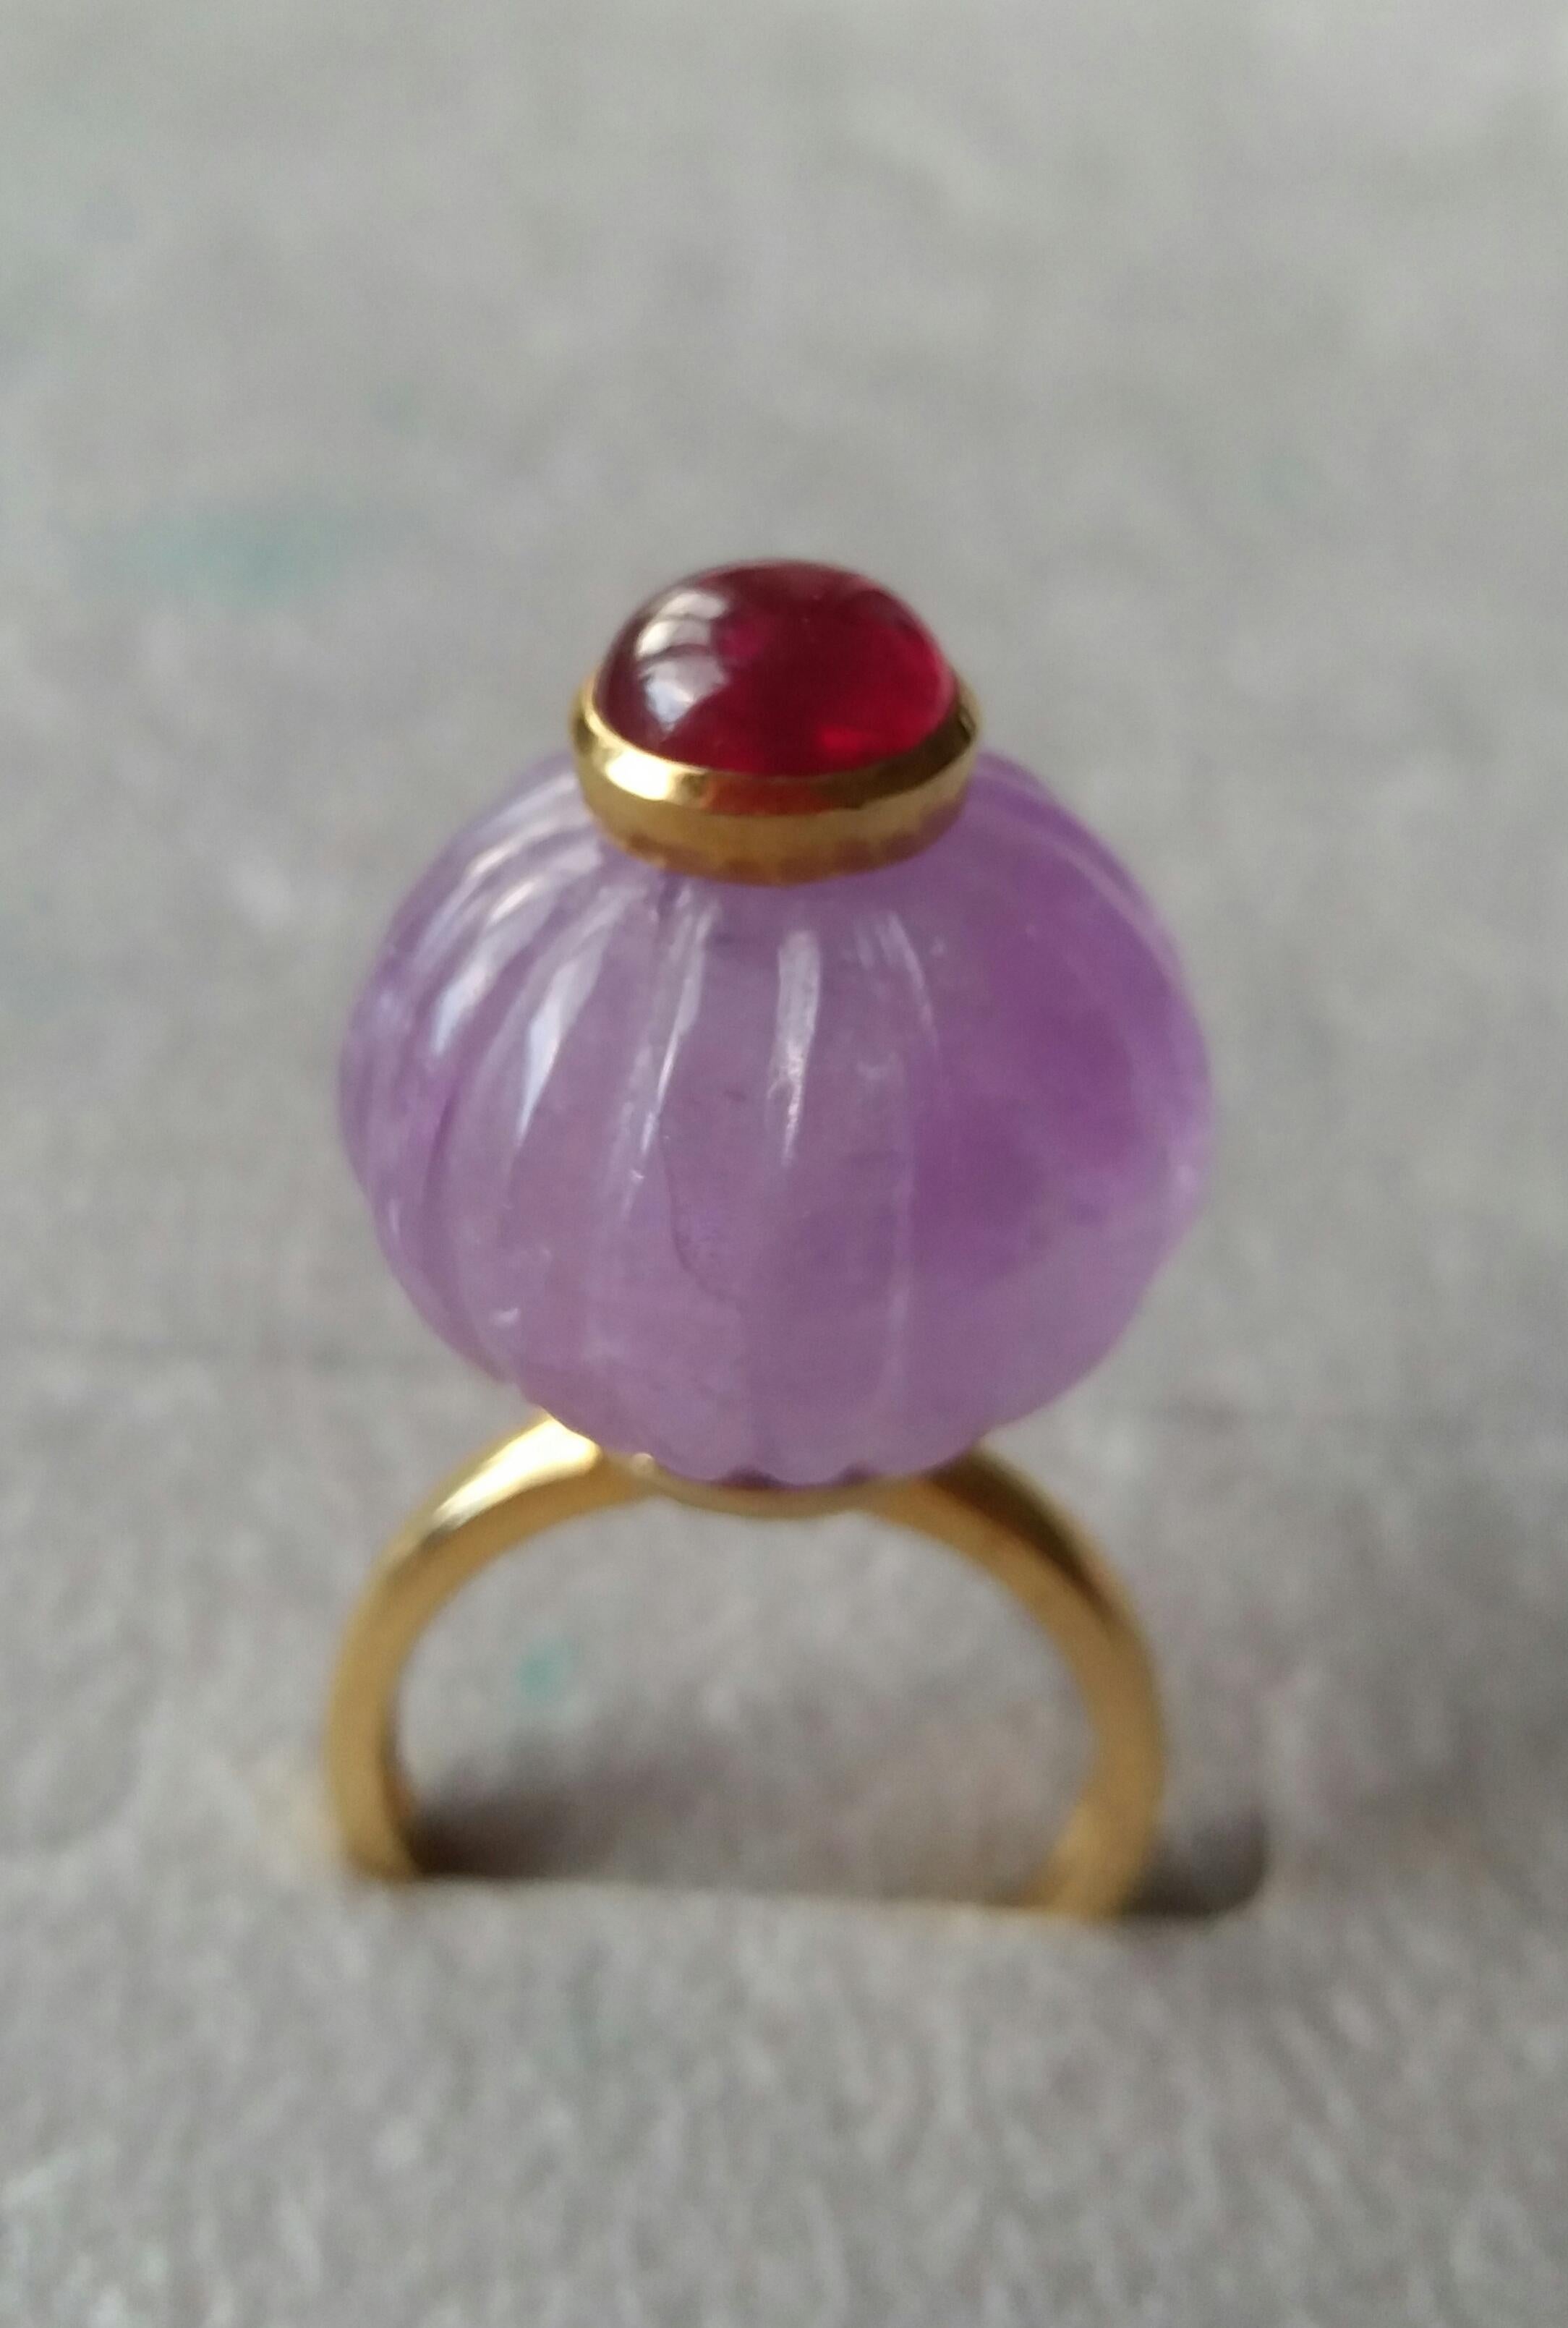 Melon cut Amethyst Round Bead  of 20 mm. in diameter and 16 mm. thick with a round Ruby cabochon of 8 mm. in diameter in the center is mounted on top of a 14 Kt. yellow gold shank.
In 1978 our workshop started in Italy to make simple-chic Art Deco